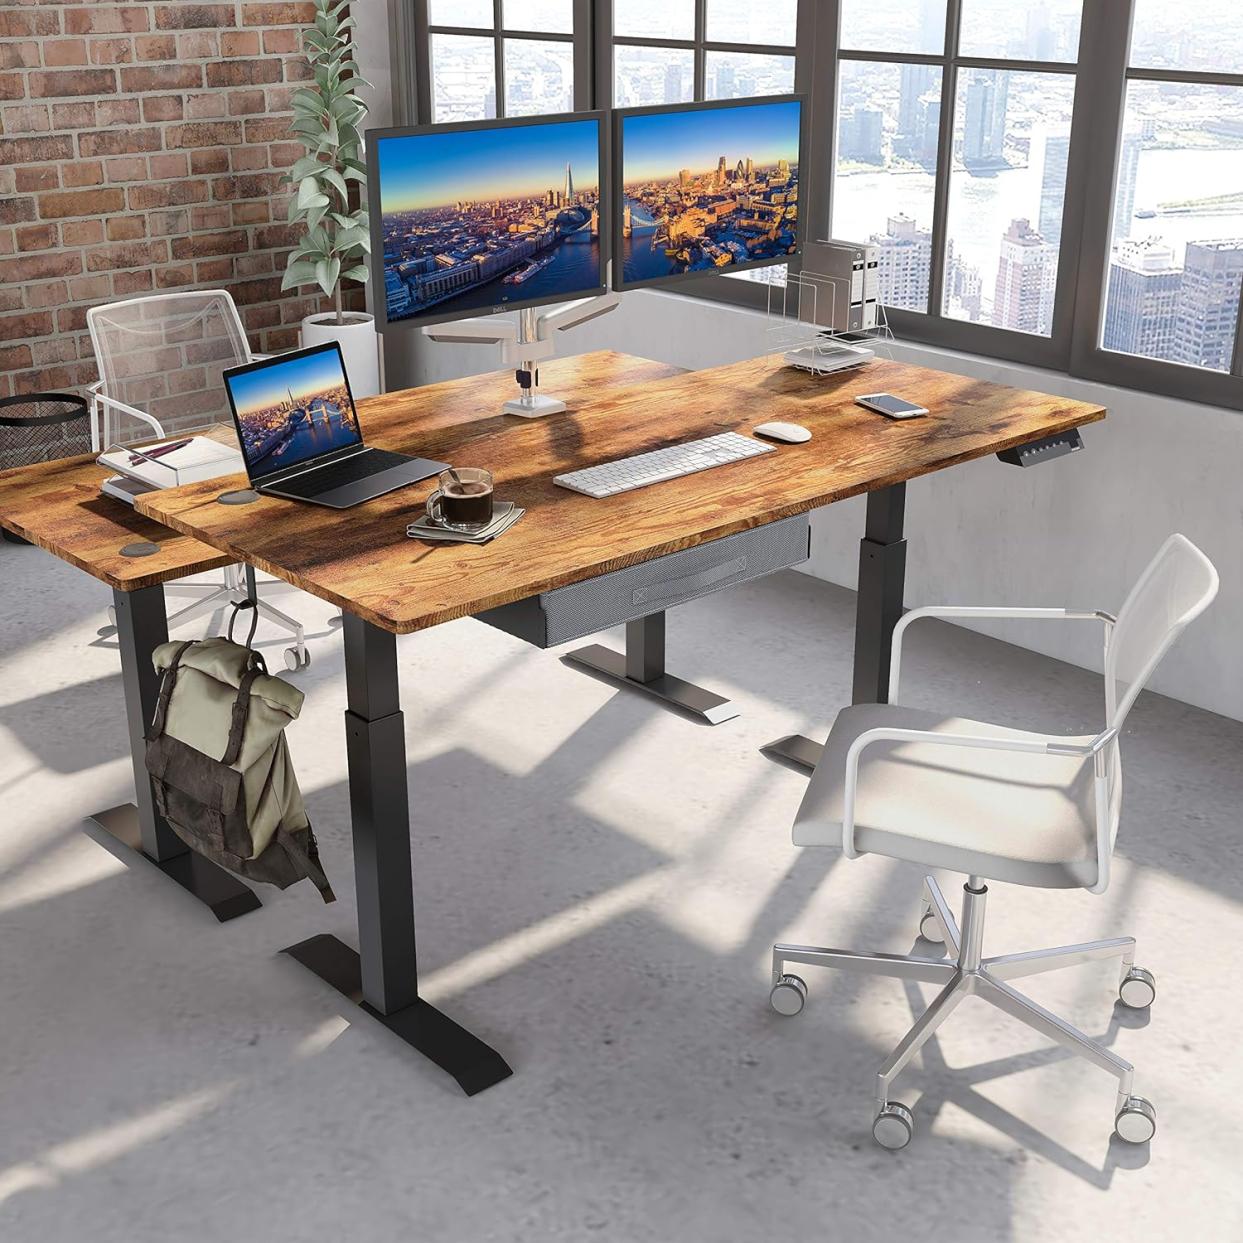 What Are the Best Accessories for a Standing Desk?